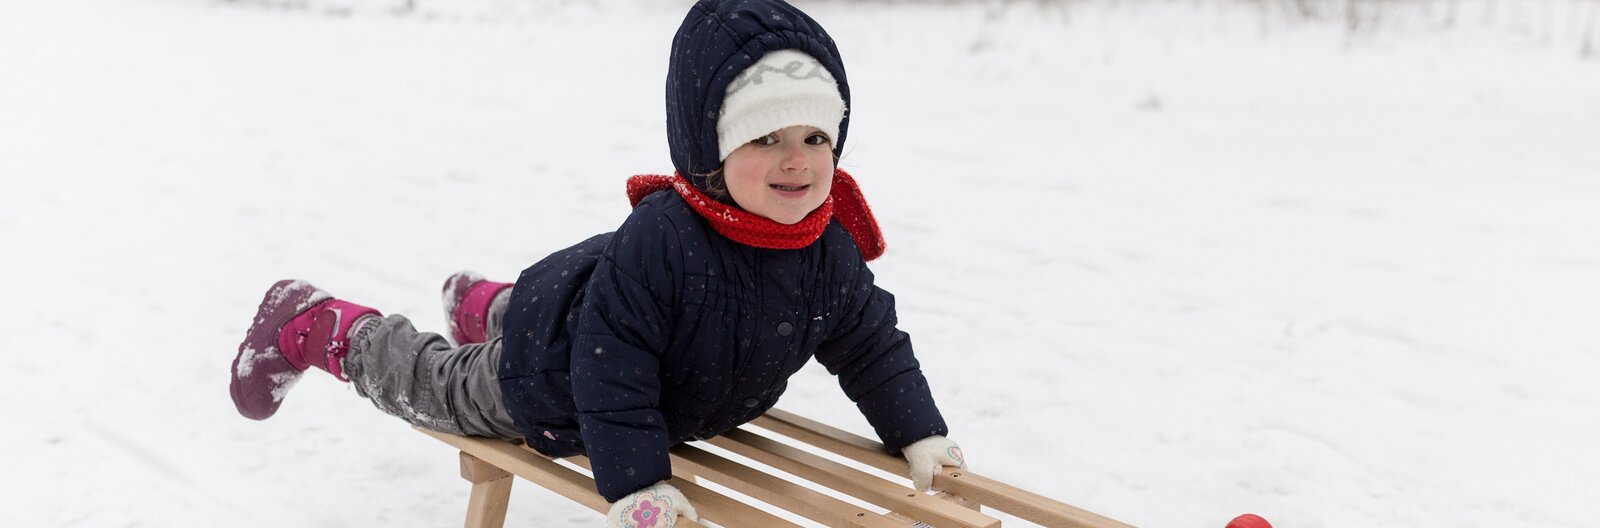 Wintertime with kids – 15 family-friendly activities from petting cats to sledding